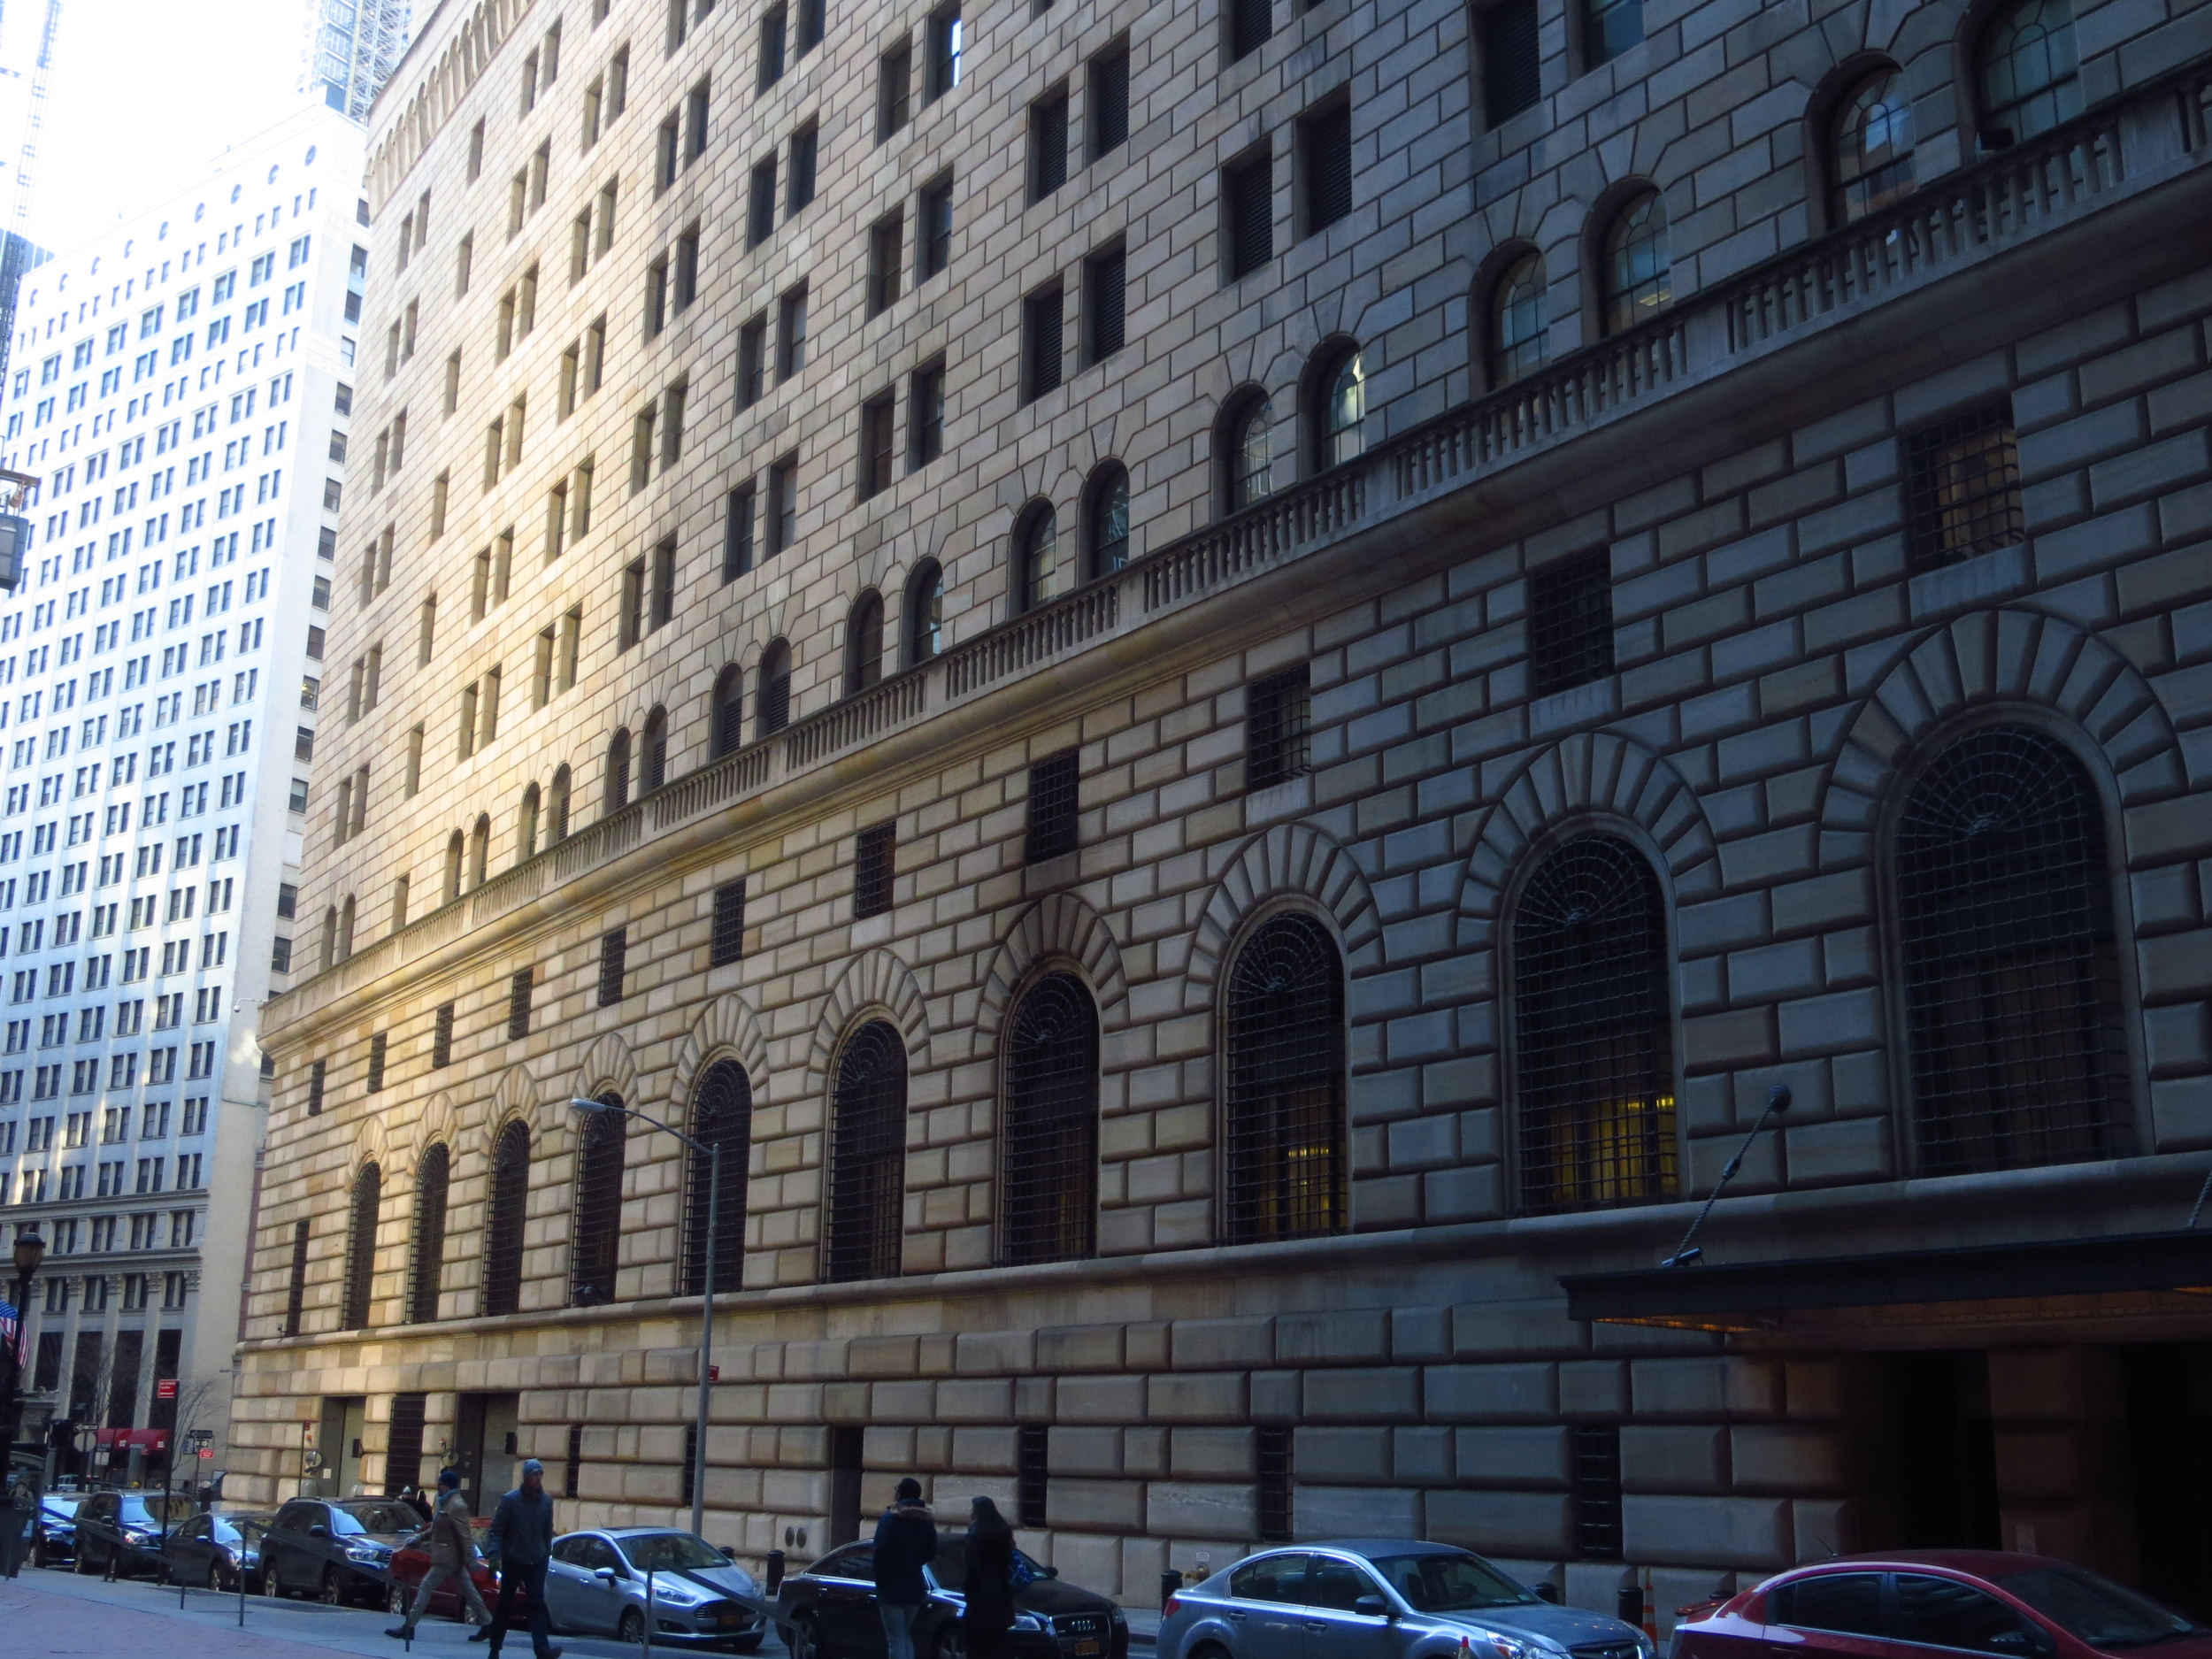 Federal Reserve Bank of New York (maybe the largest gold repository in the world)